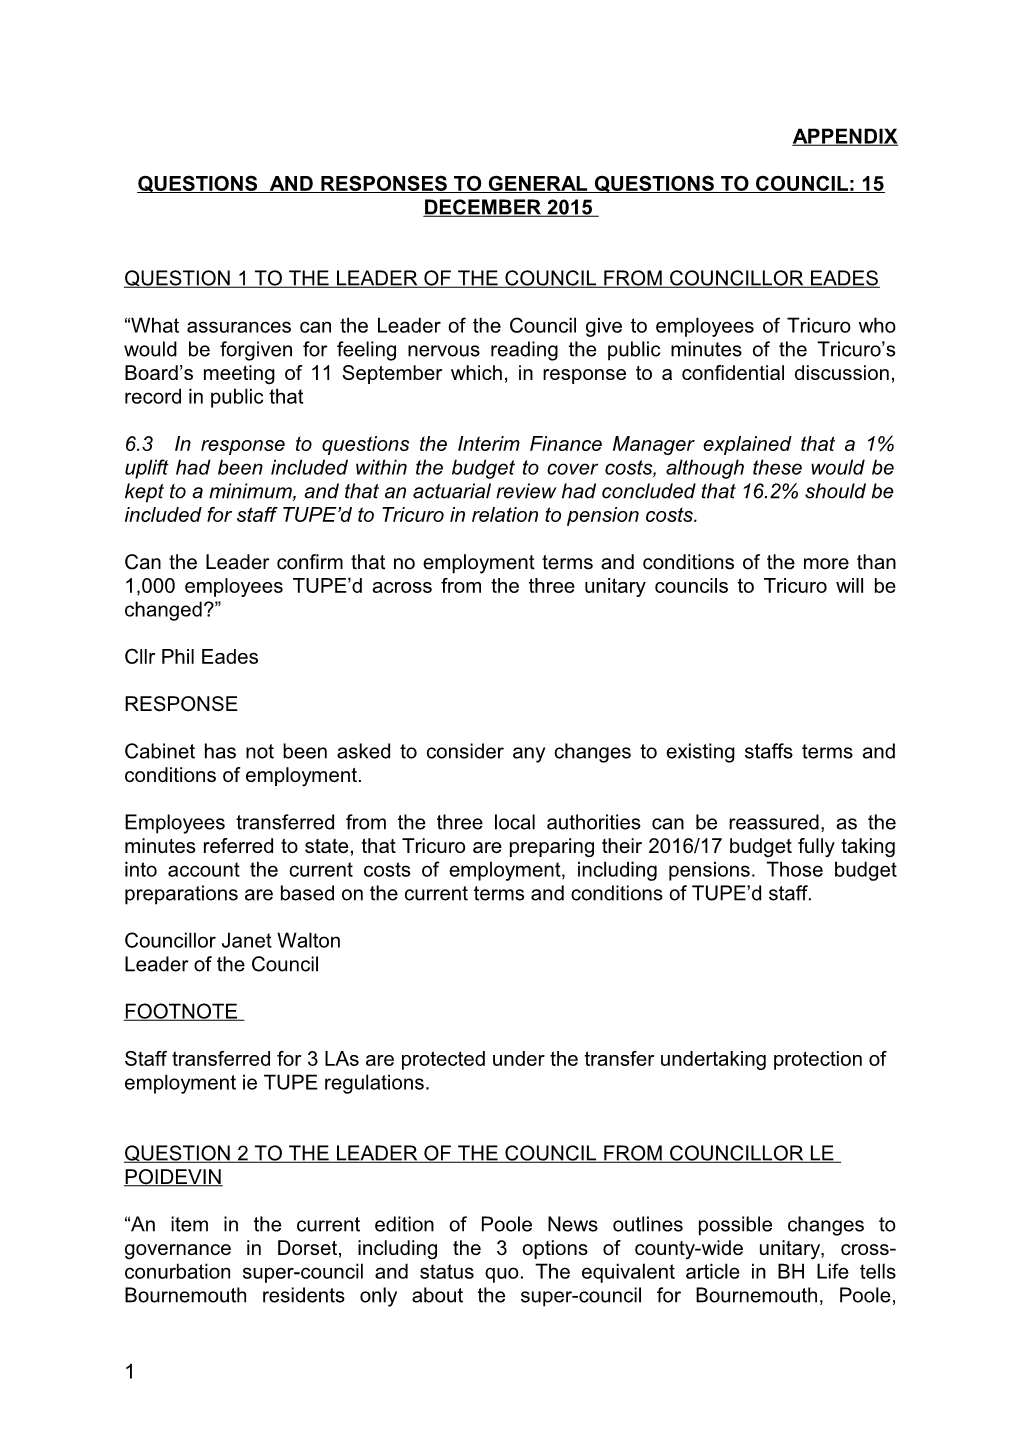 Questions and Responses to General Questions to Council: 15December 2015